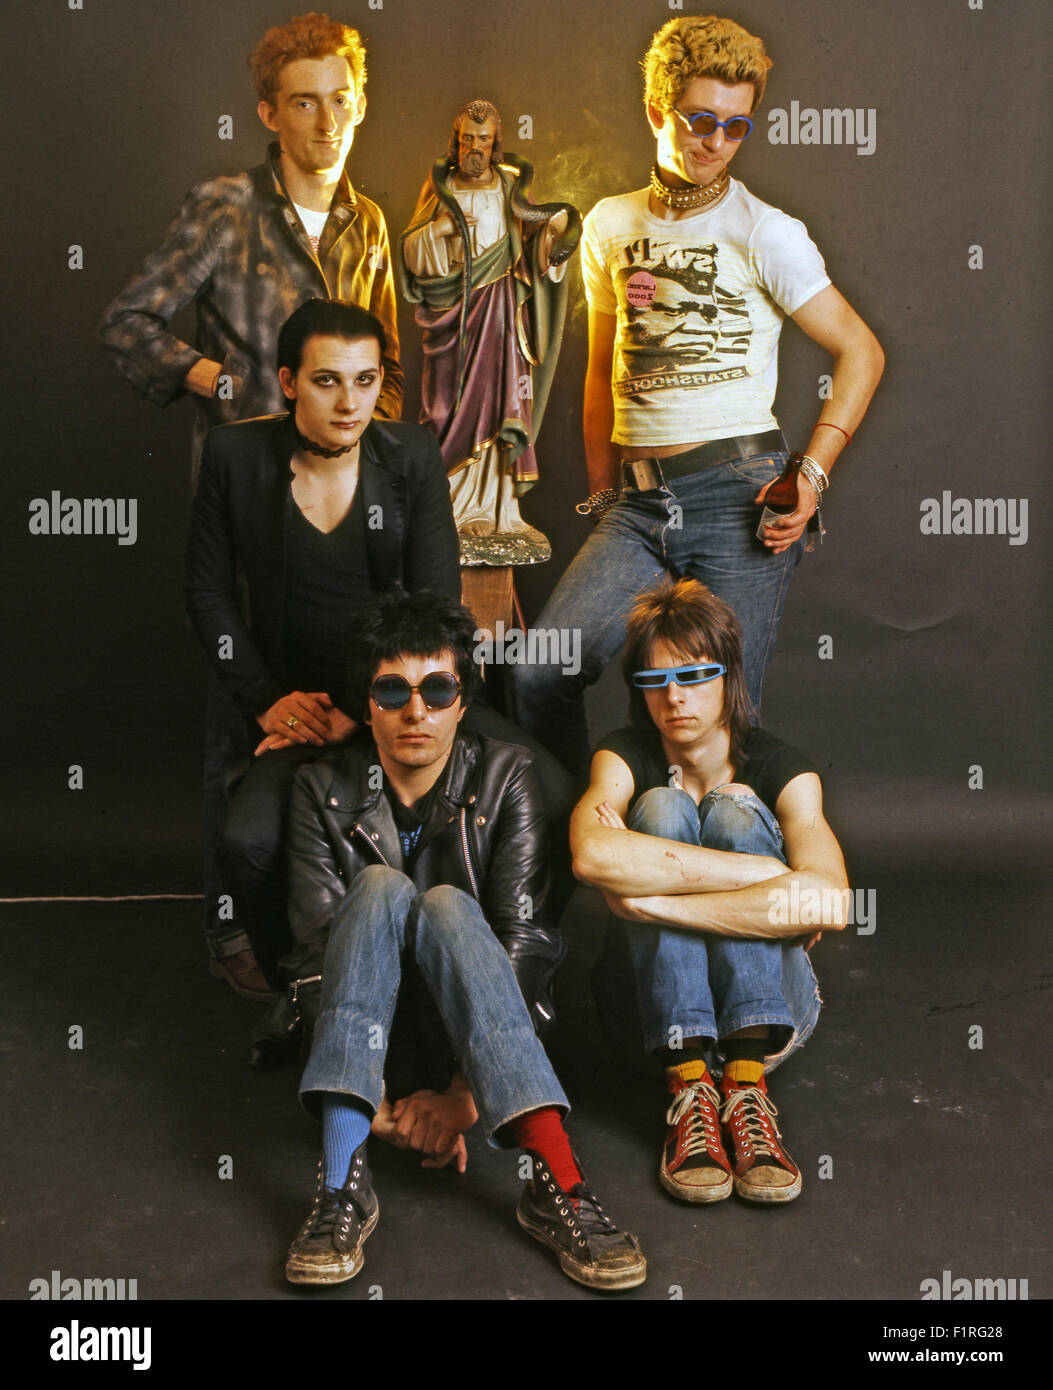 THE DAMNED  UK rock group about 1981 Stock Photo